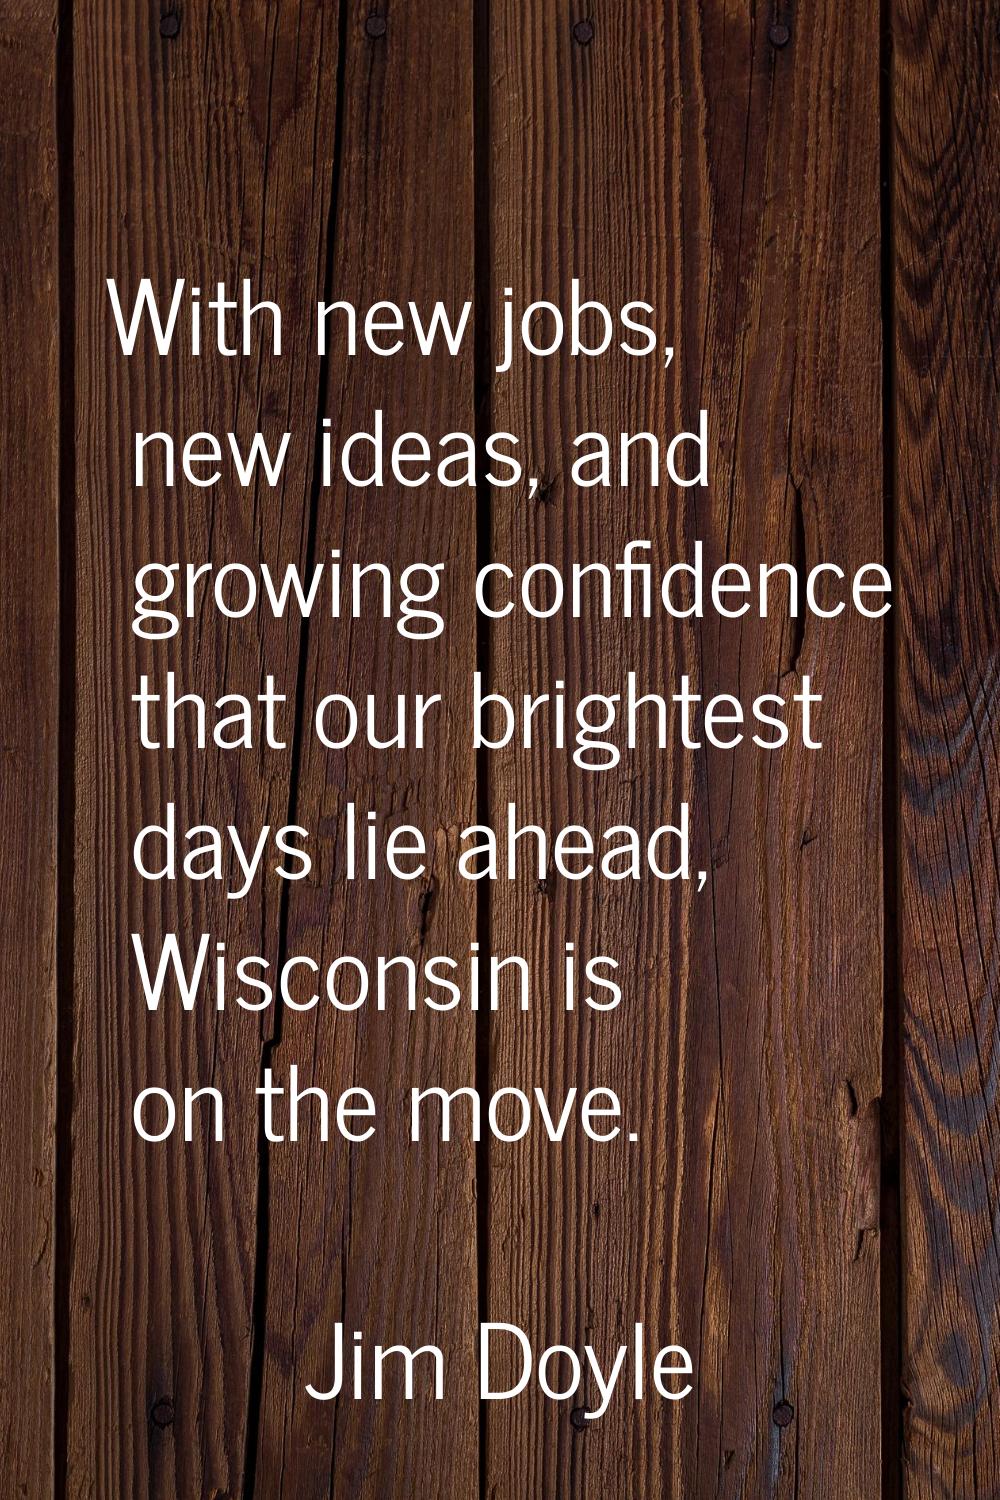 With new jobs, new ideas, and growing confidence that our brightest days lie ahead, Wisconsin is on